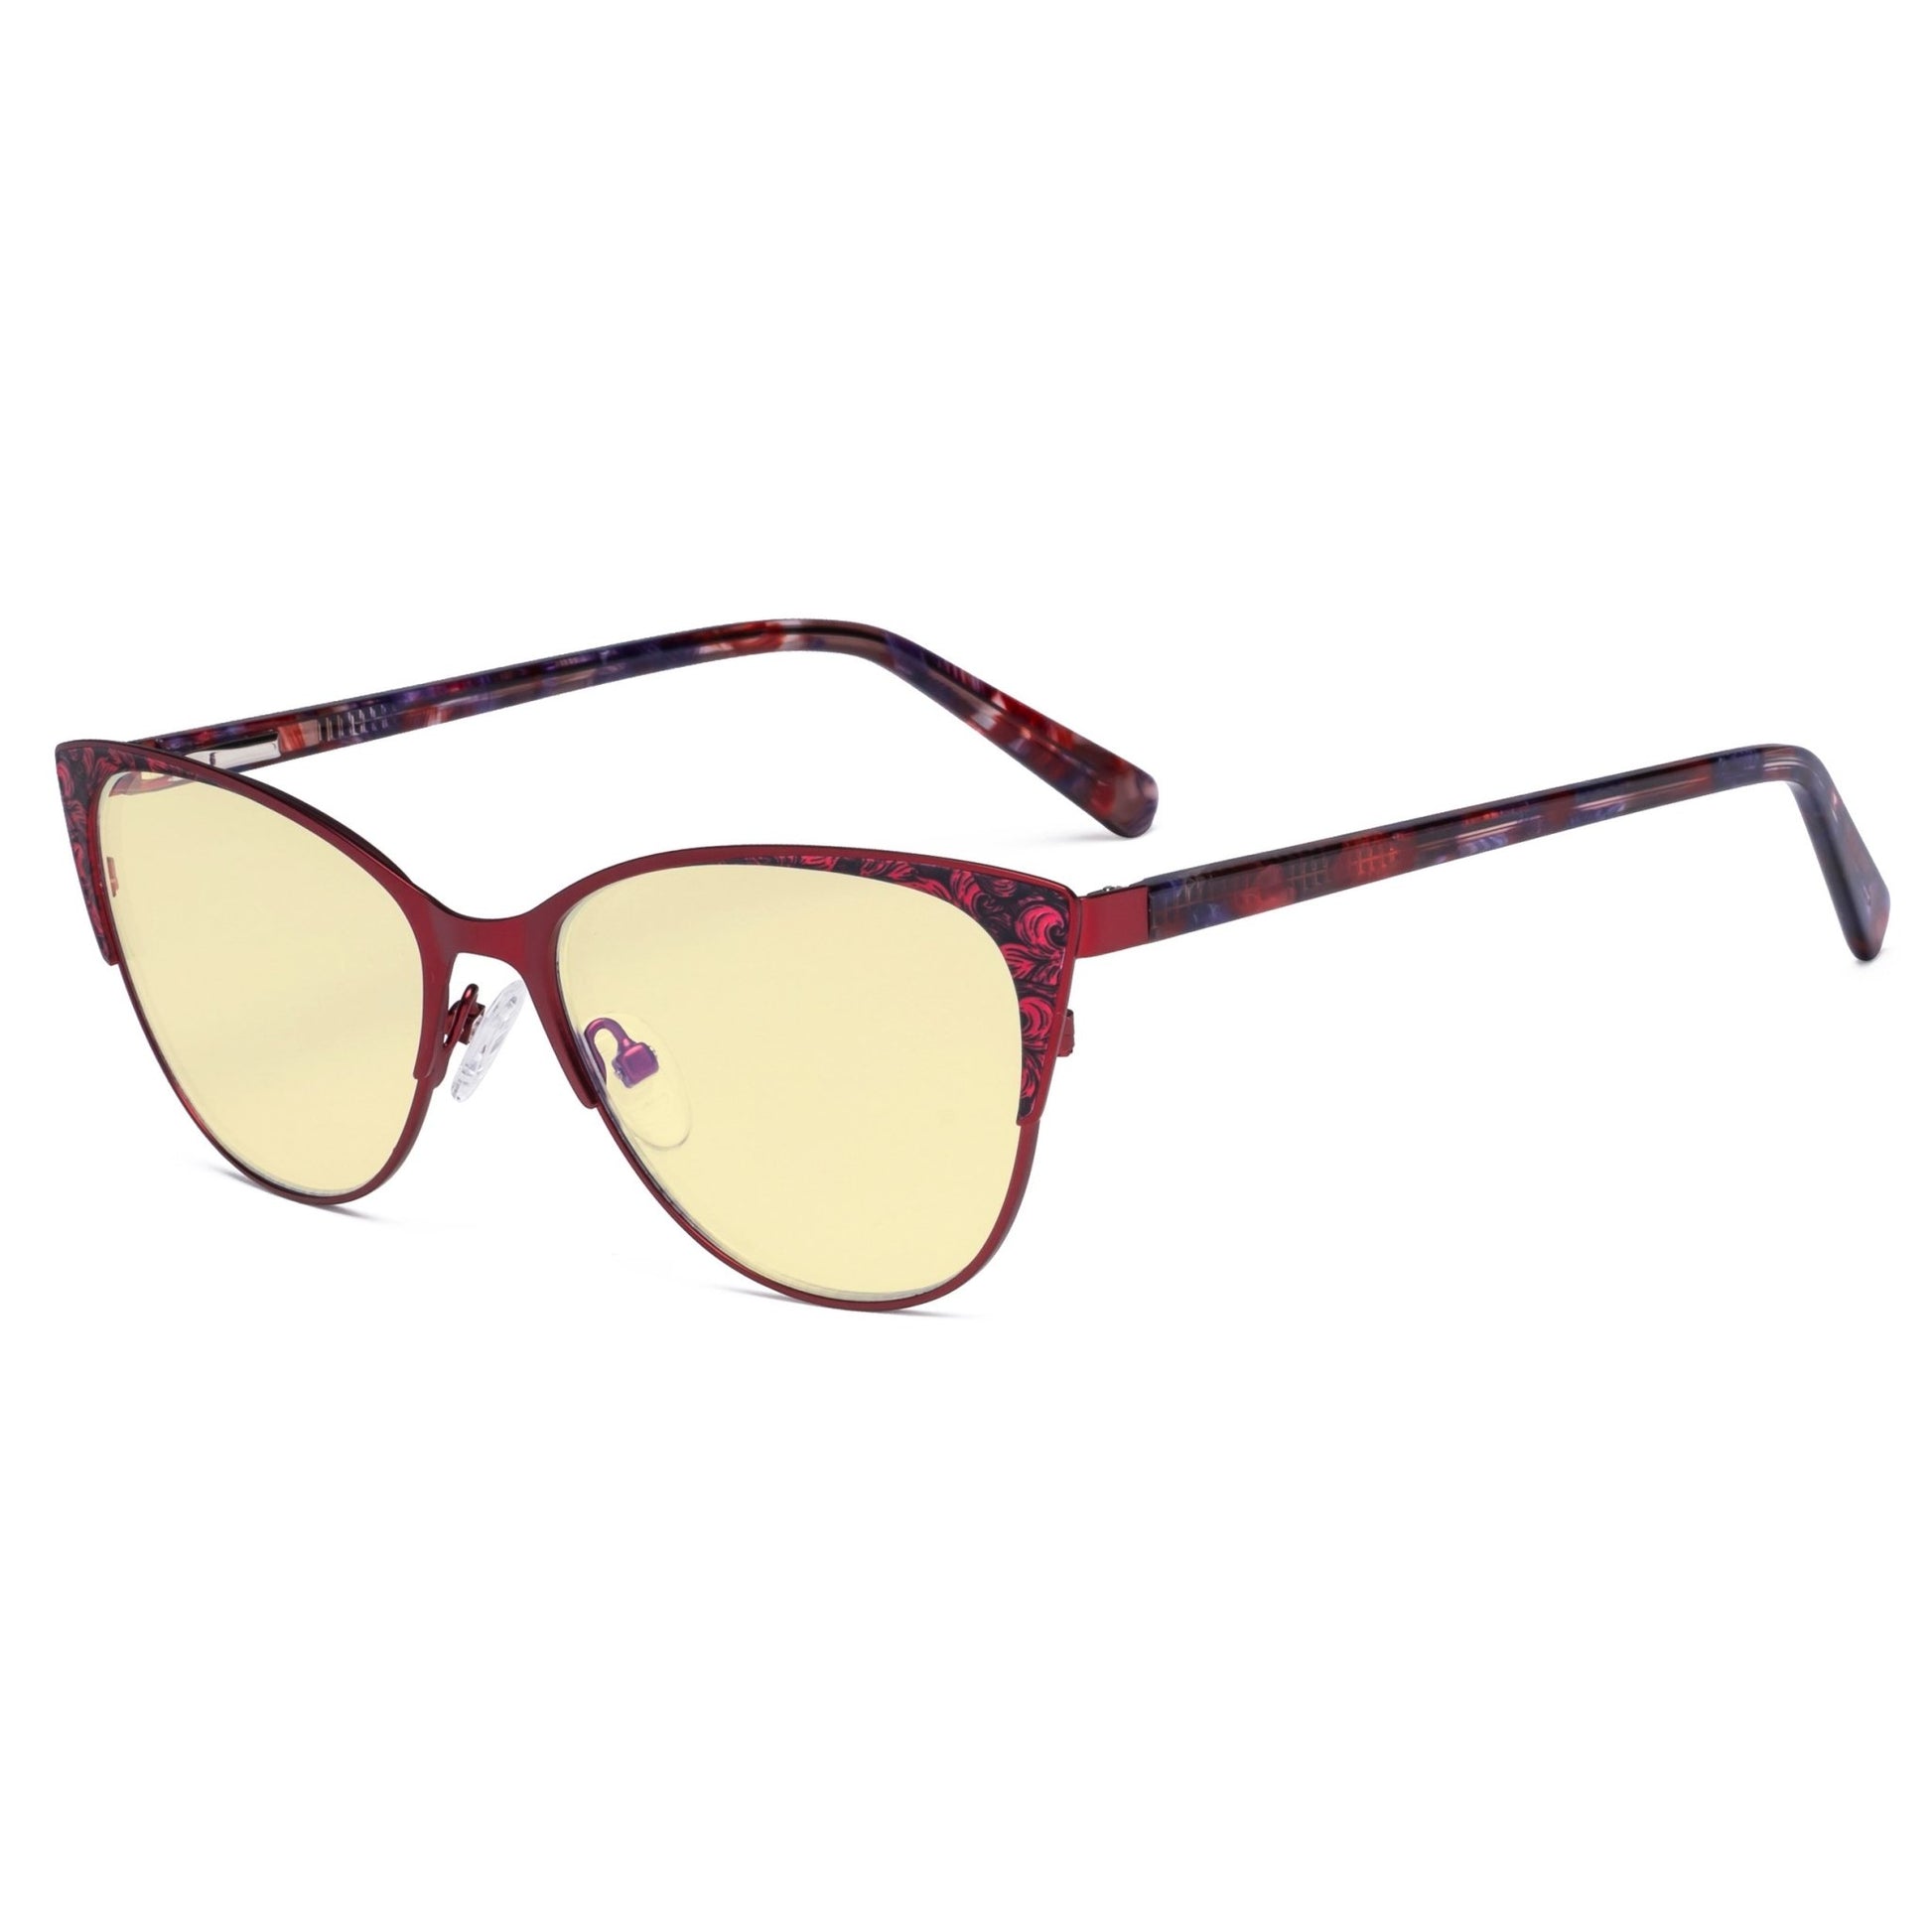 Butterfly Design Computer Eyeglasses Red LX19044-BB60